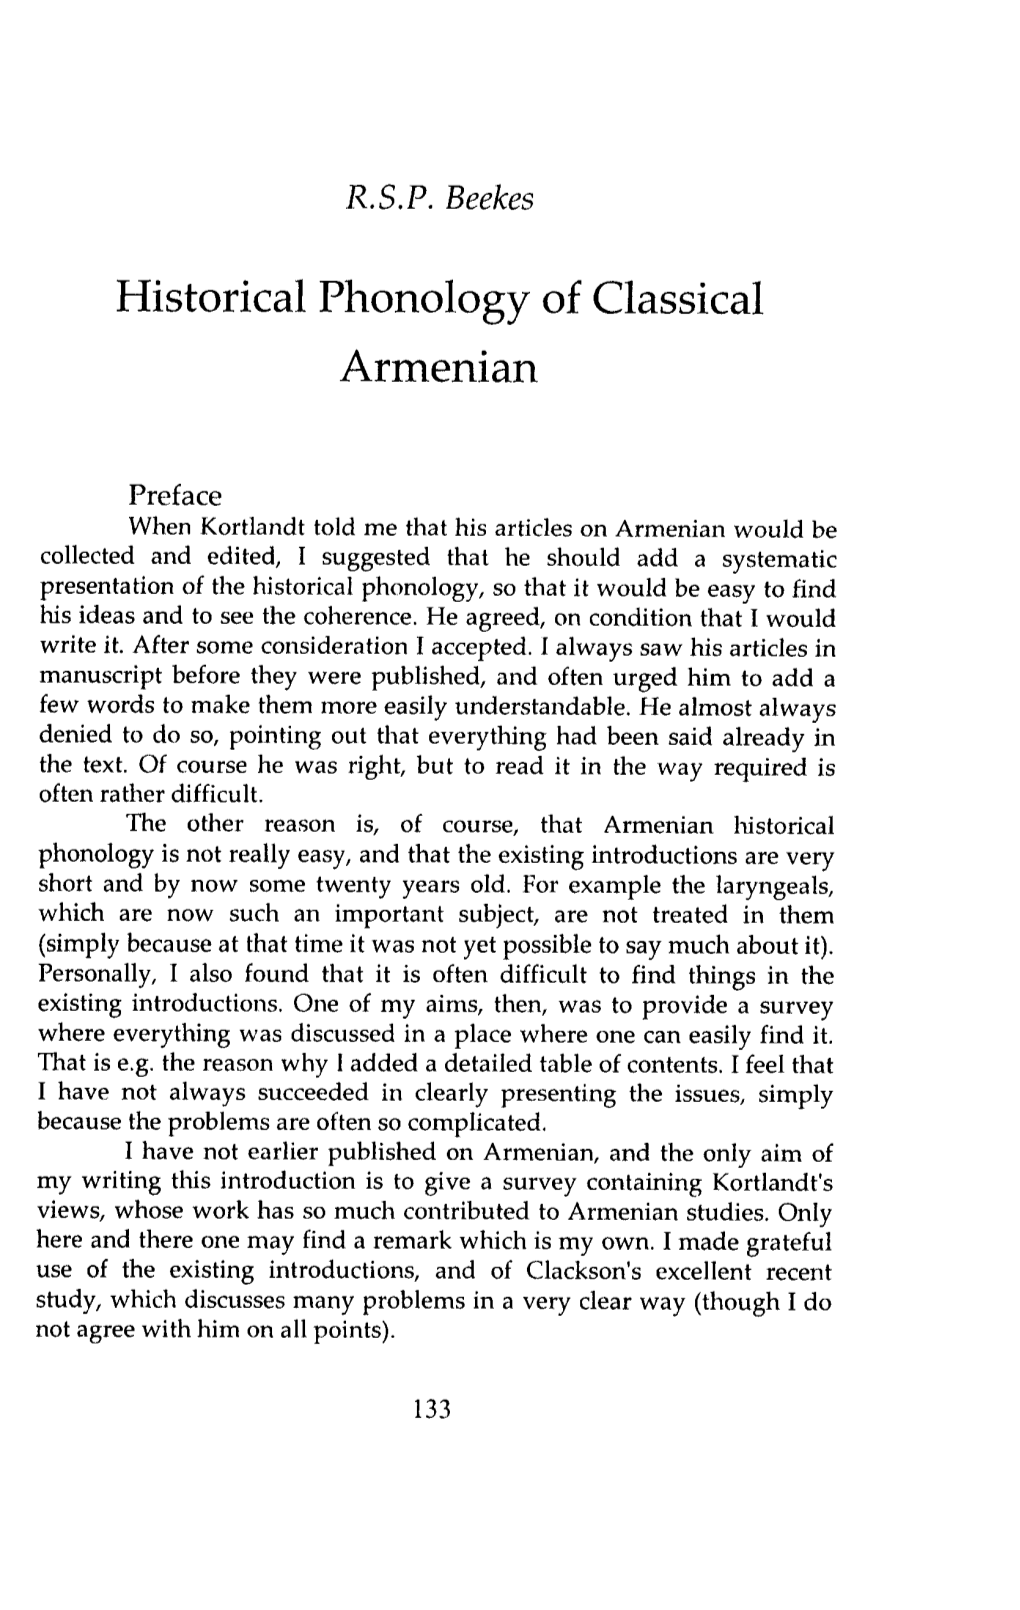 Historical Phonology of Classical Armenian